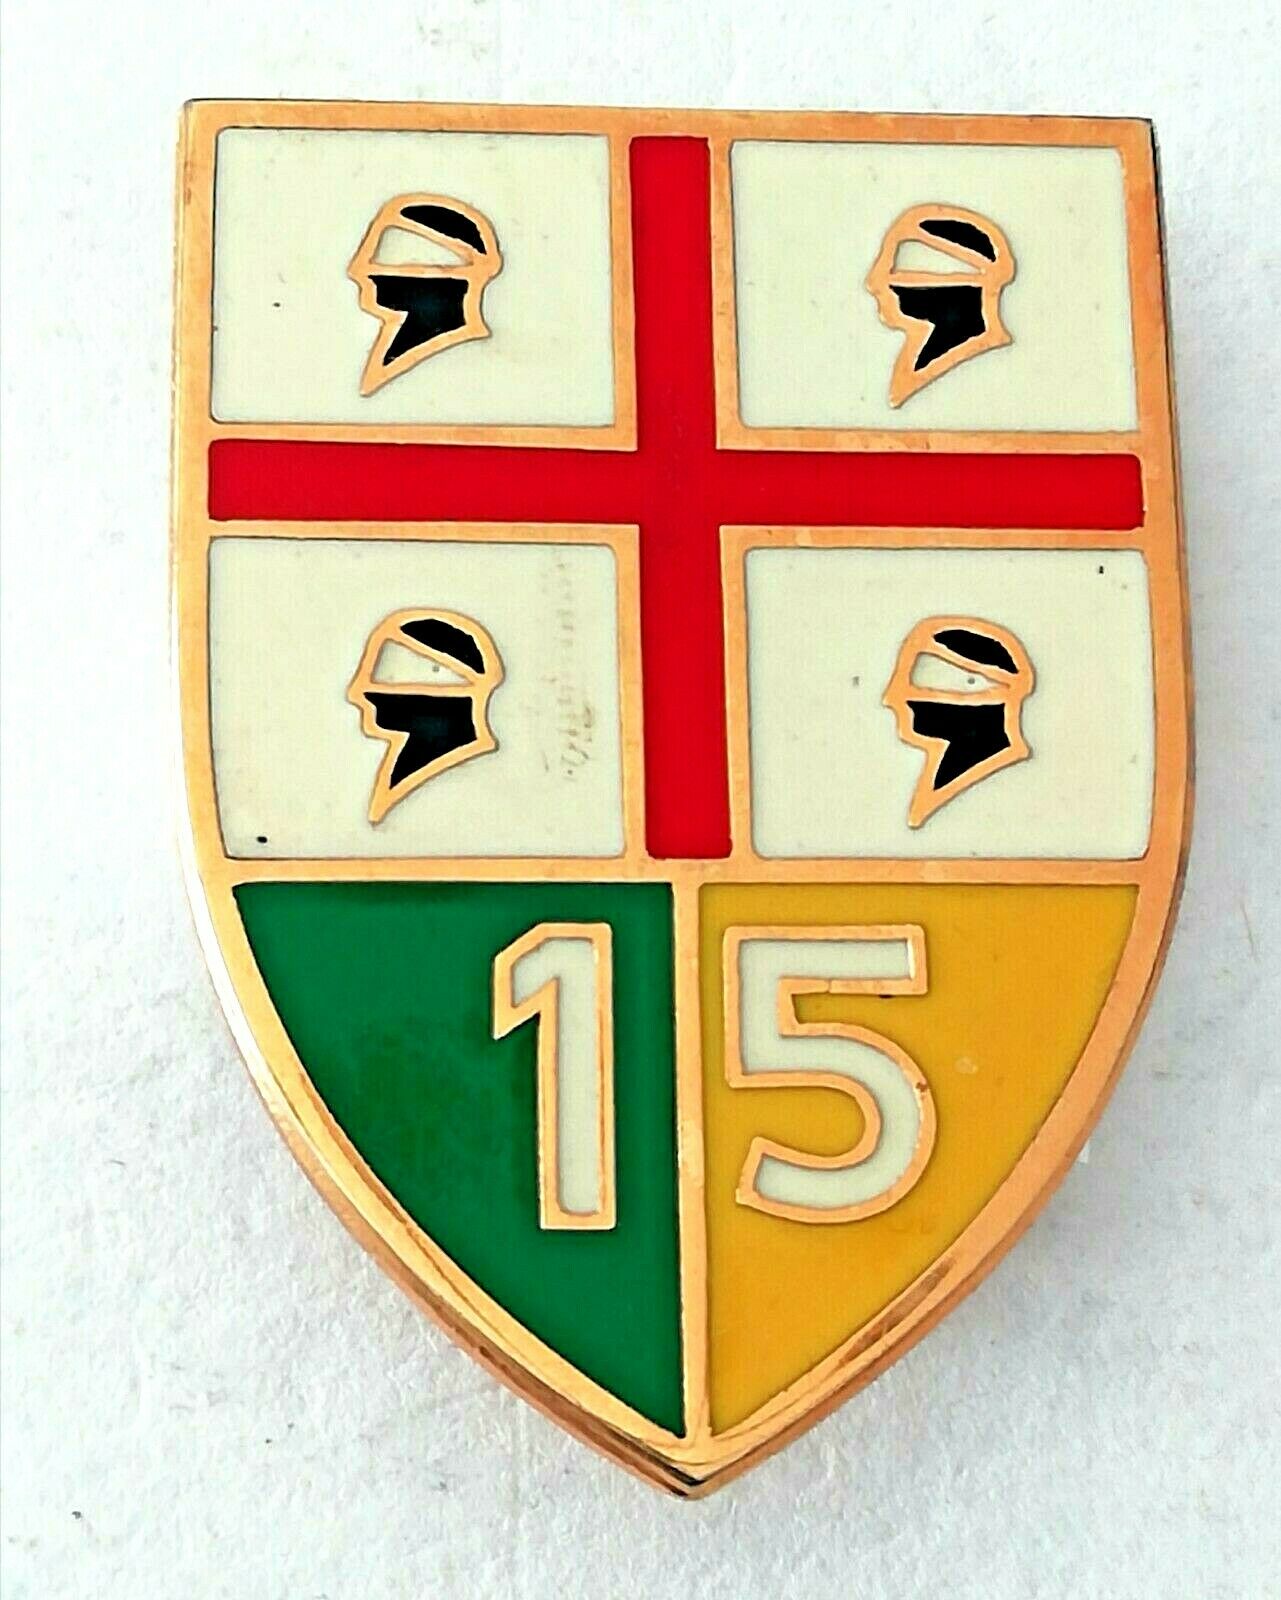 Arms of 15th Legion of the Financial Guard